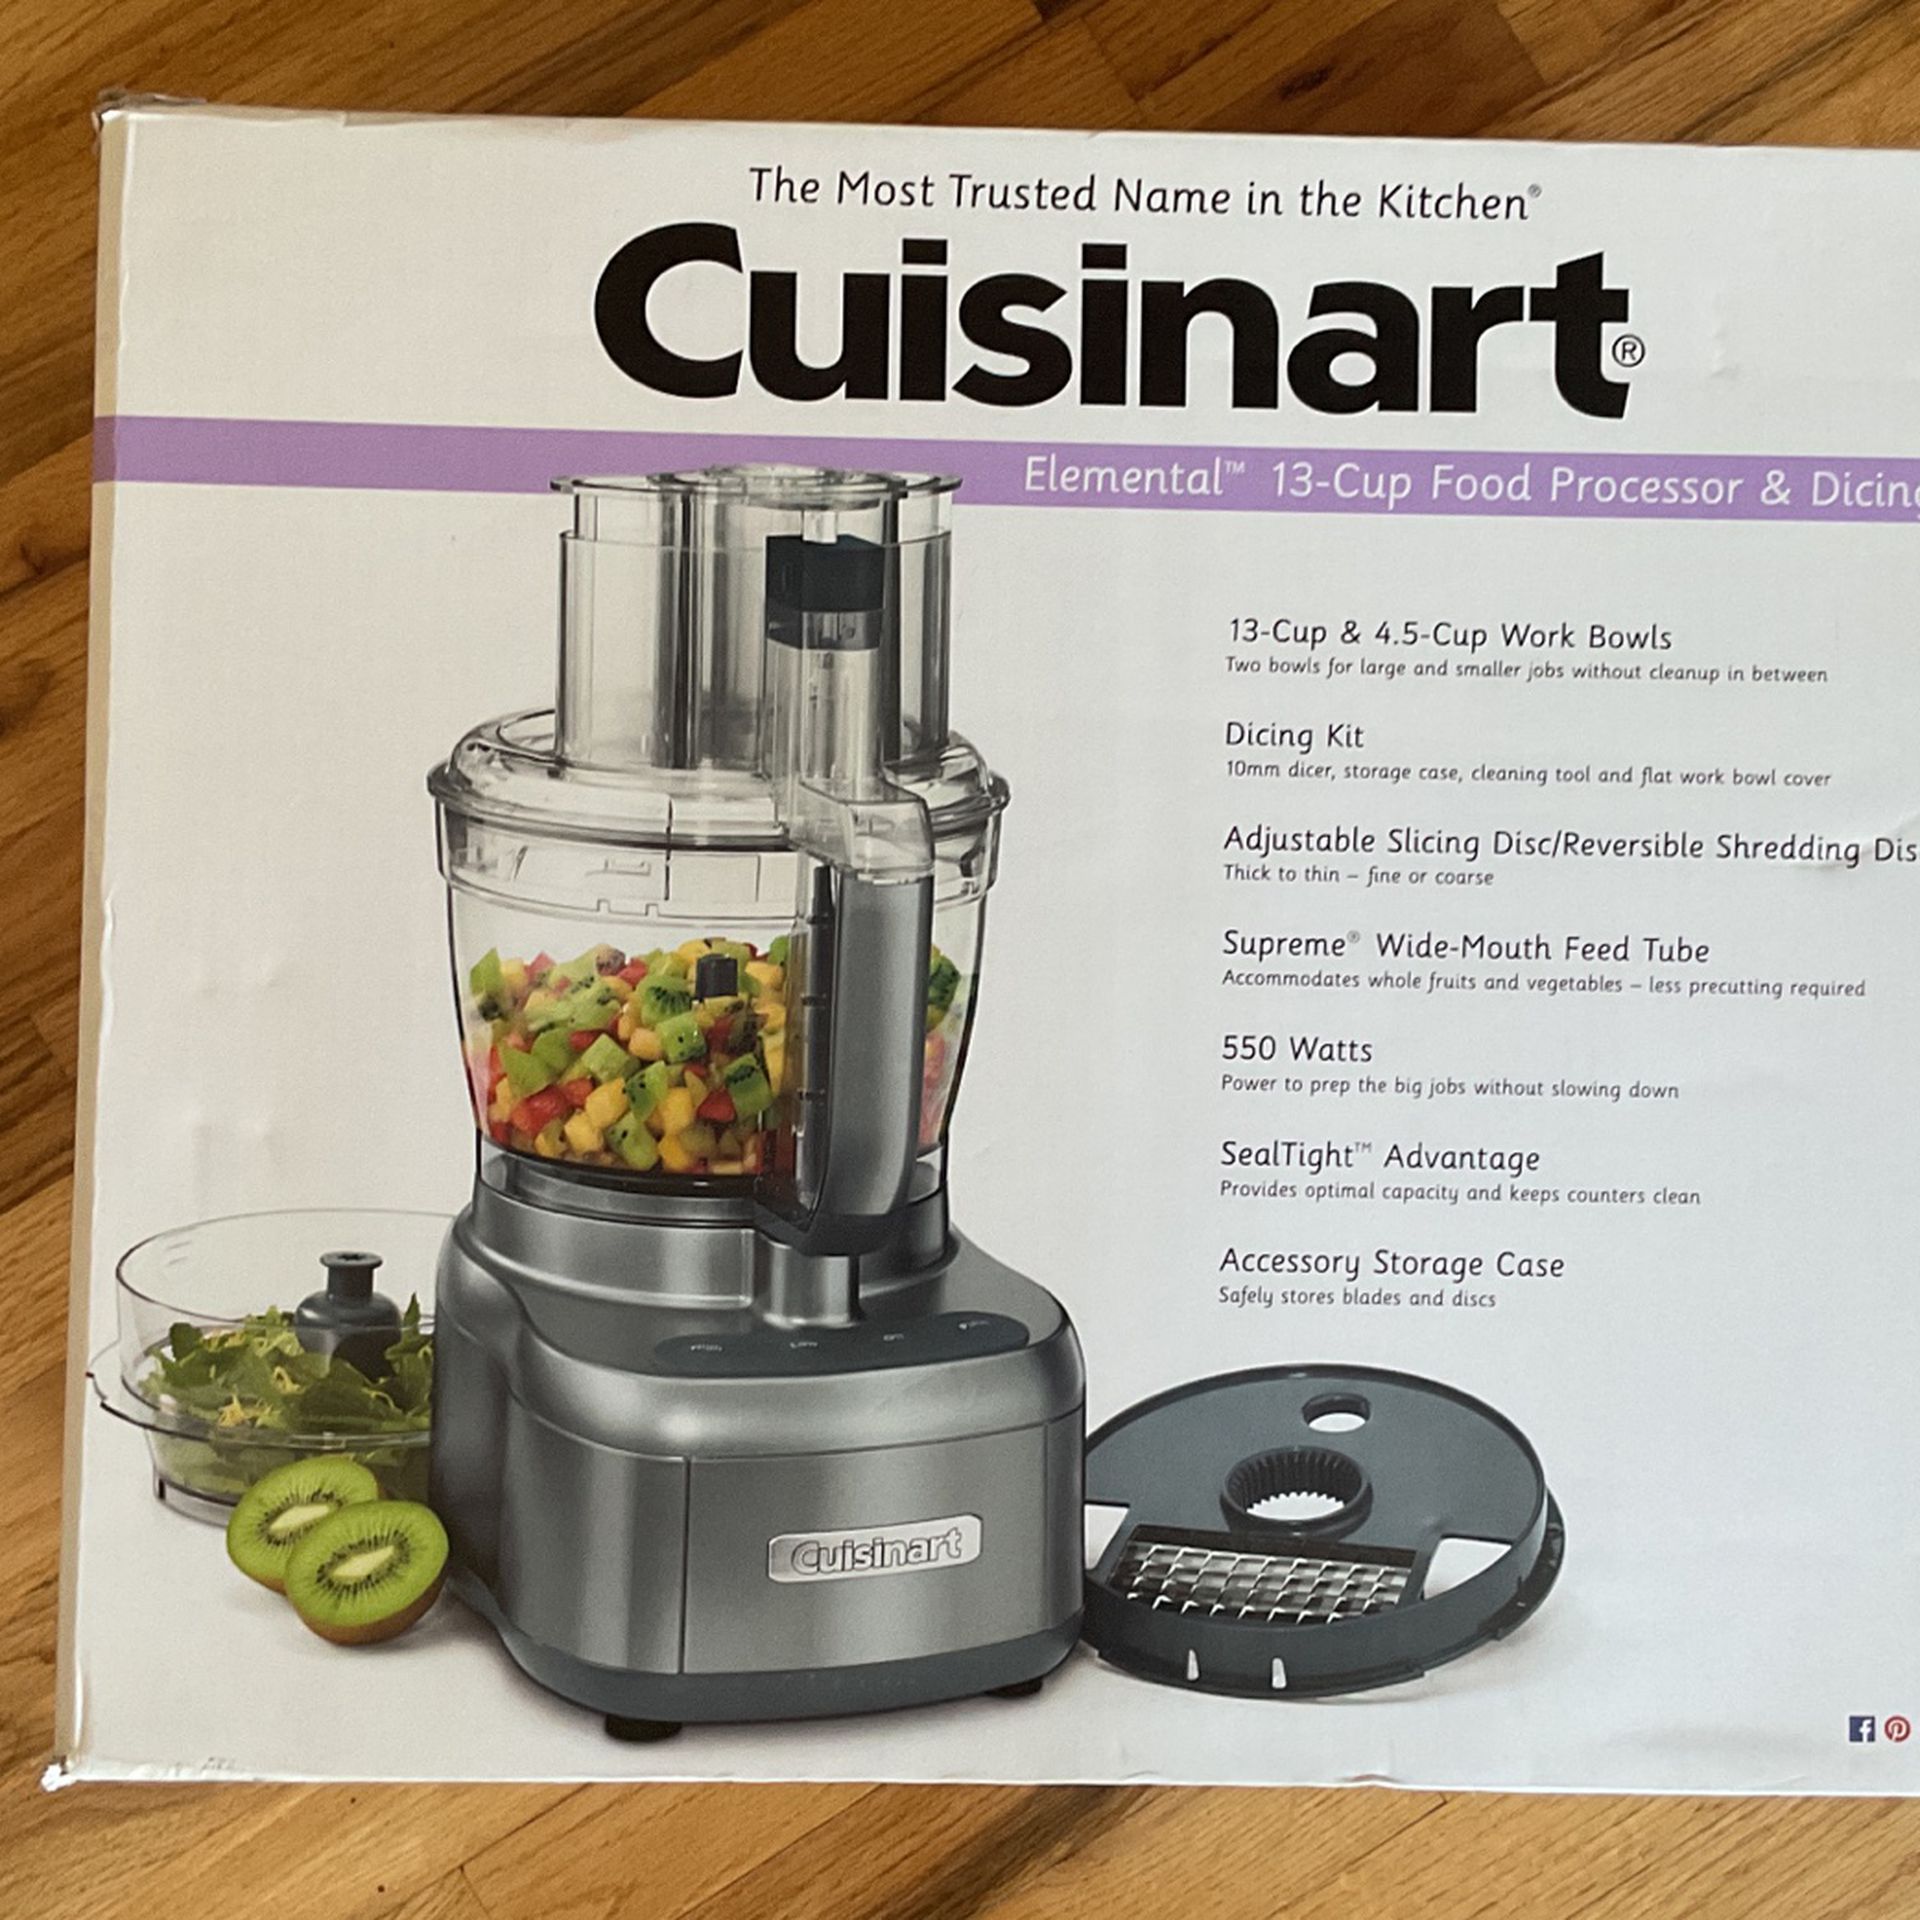 BRAND NEW - Cuisinart Food Processor 13 Cup for Sale in Brooklyn